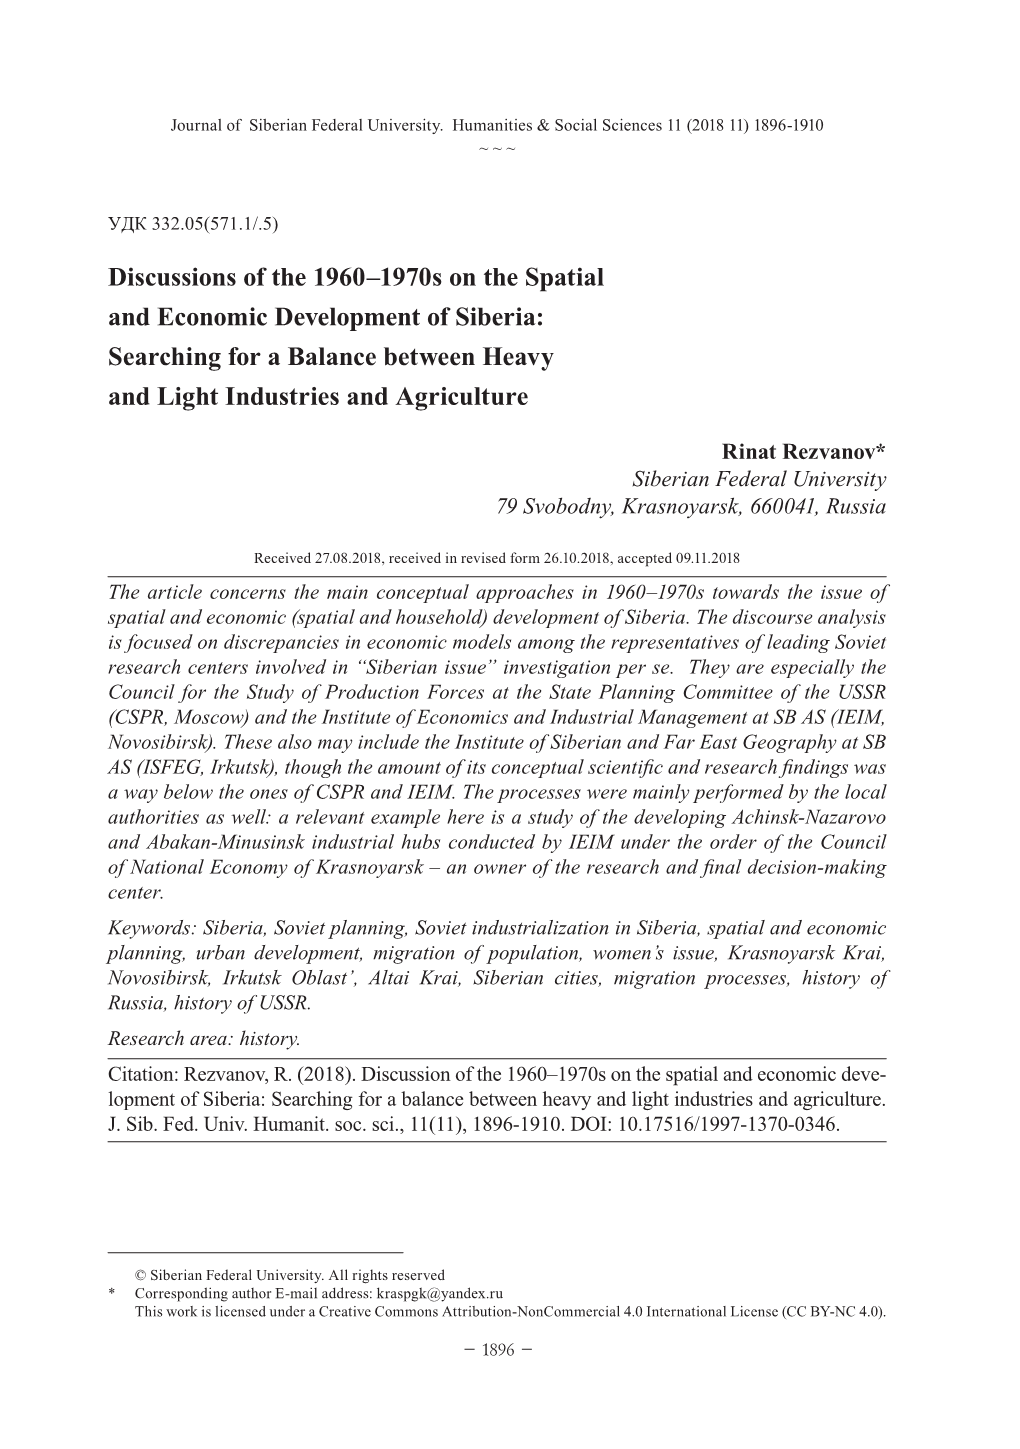 Discussions of the 1960–1970S on the Spatial and Economic Development of Siberia: Searching for a Balance Between Heavy and Light Industries and Agriculture